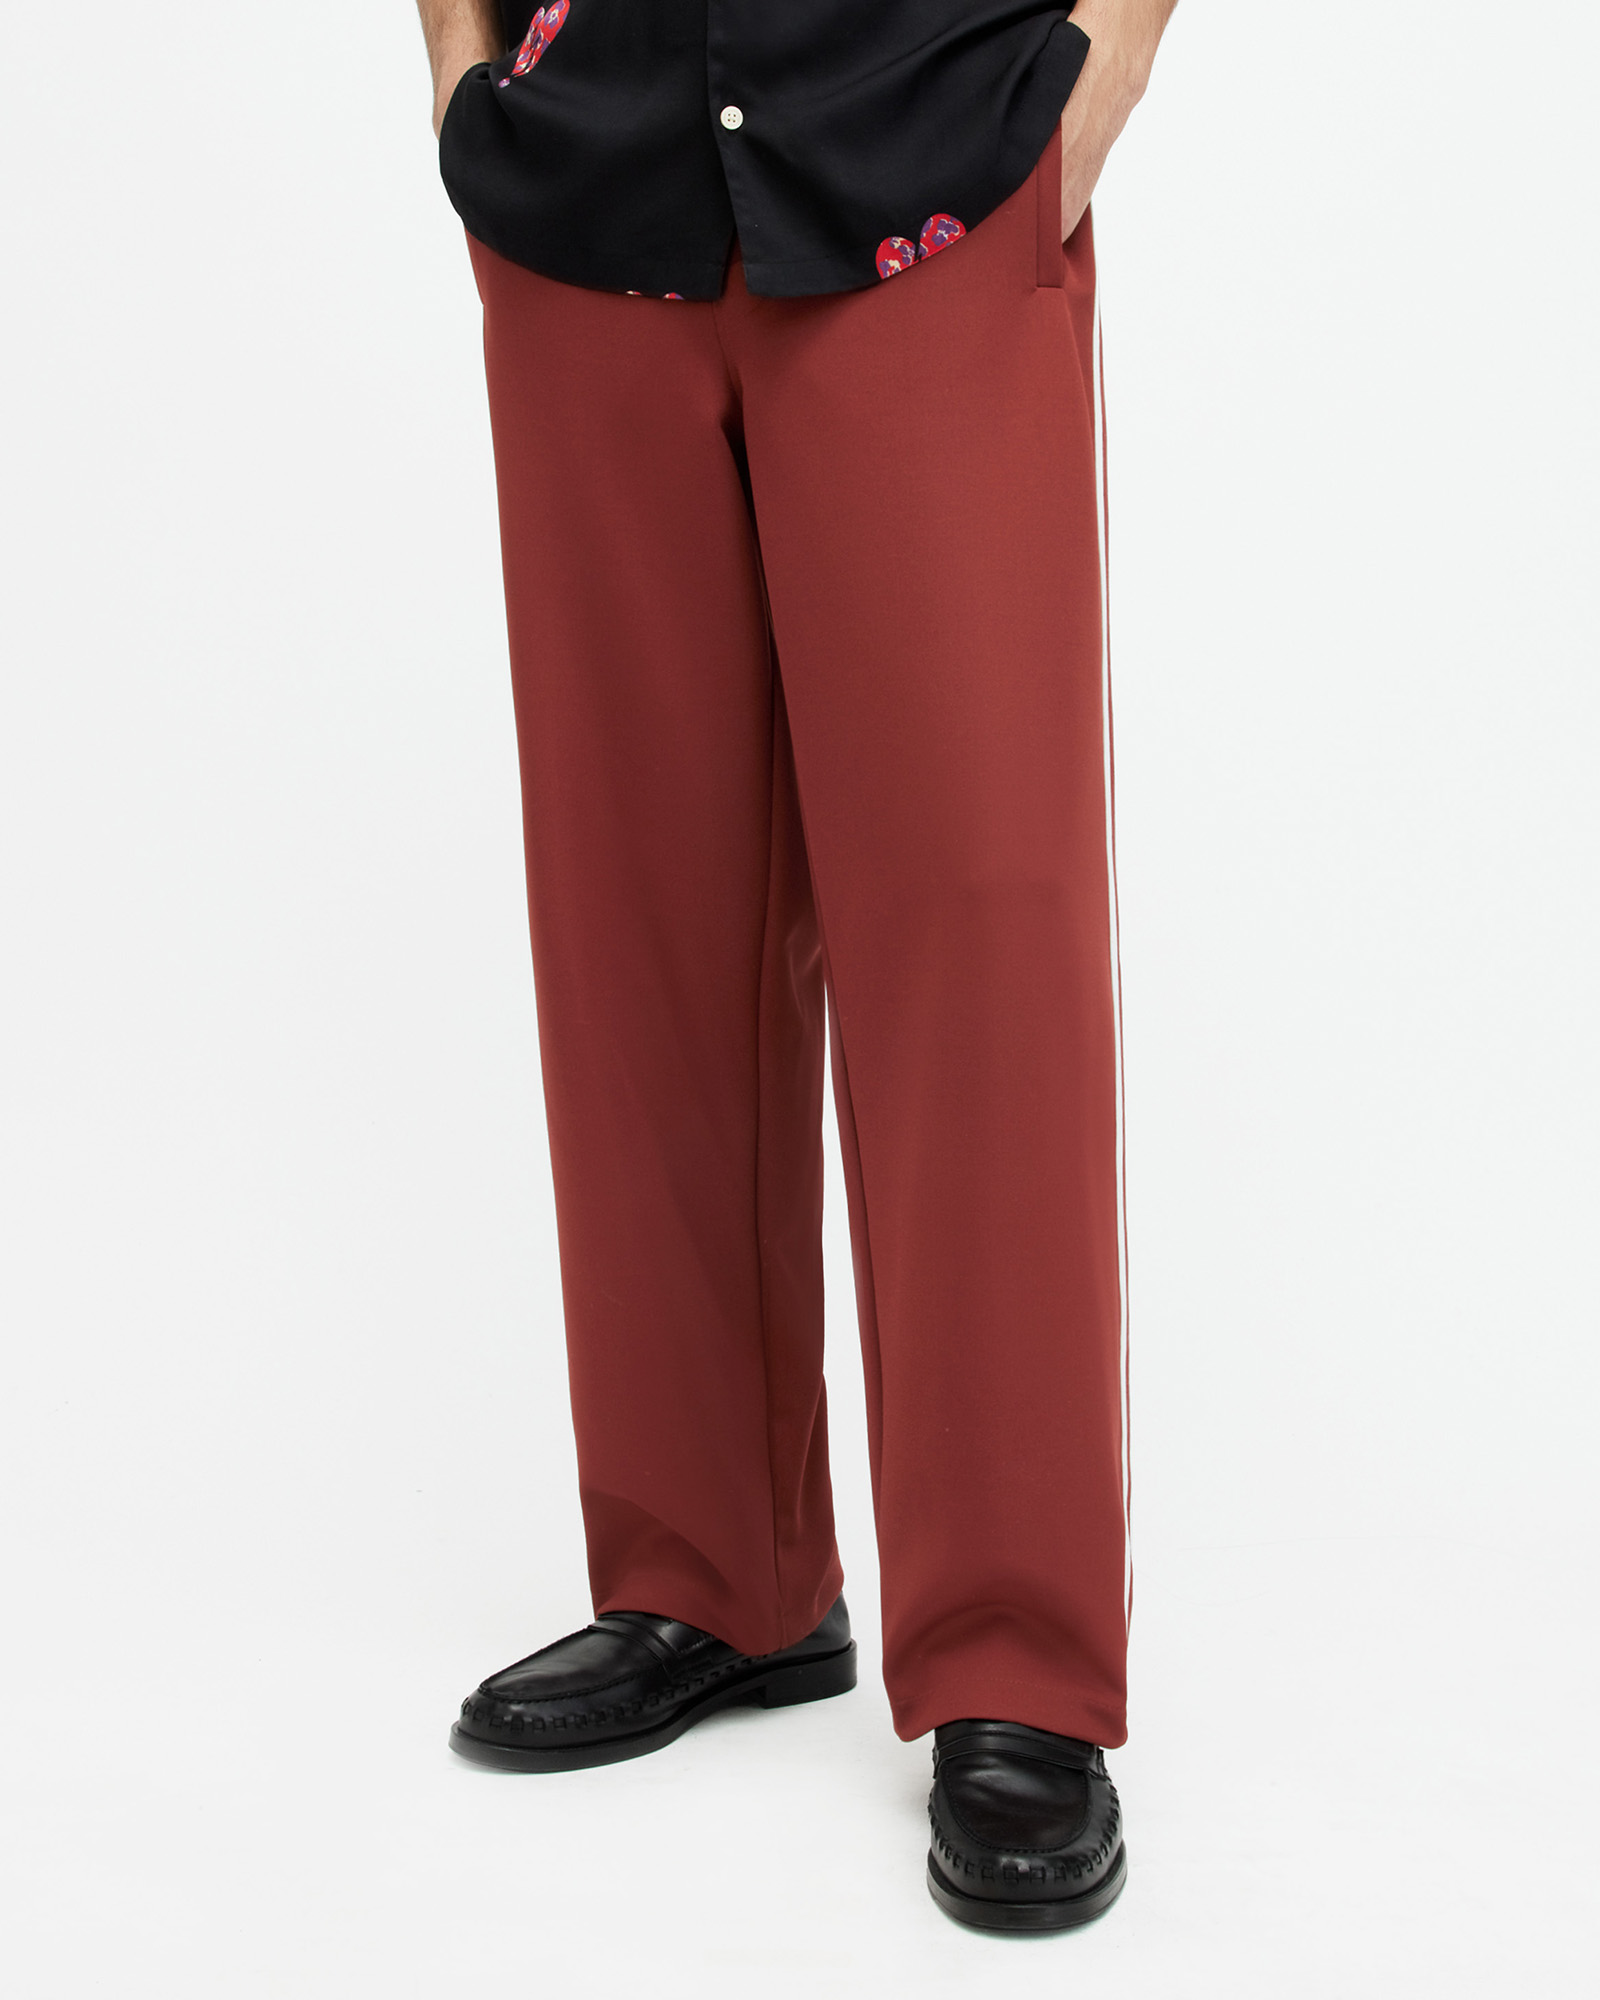 AllSaints Oren Straight Fit Sweatpants,, IMPERIAL RED